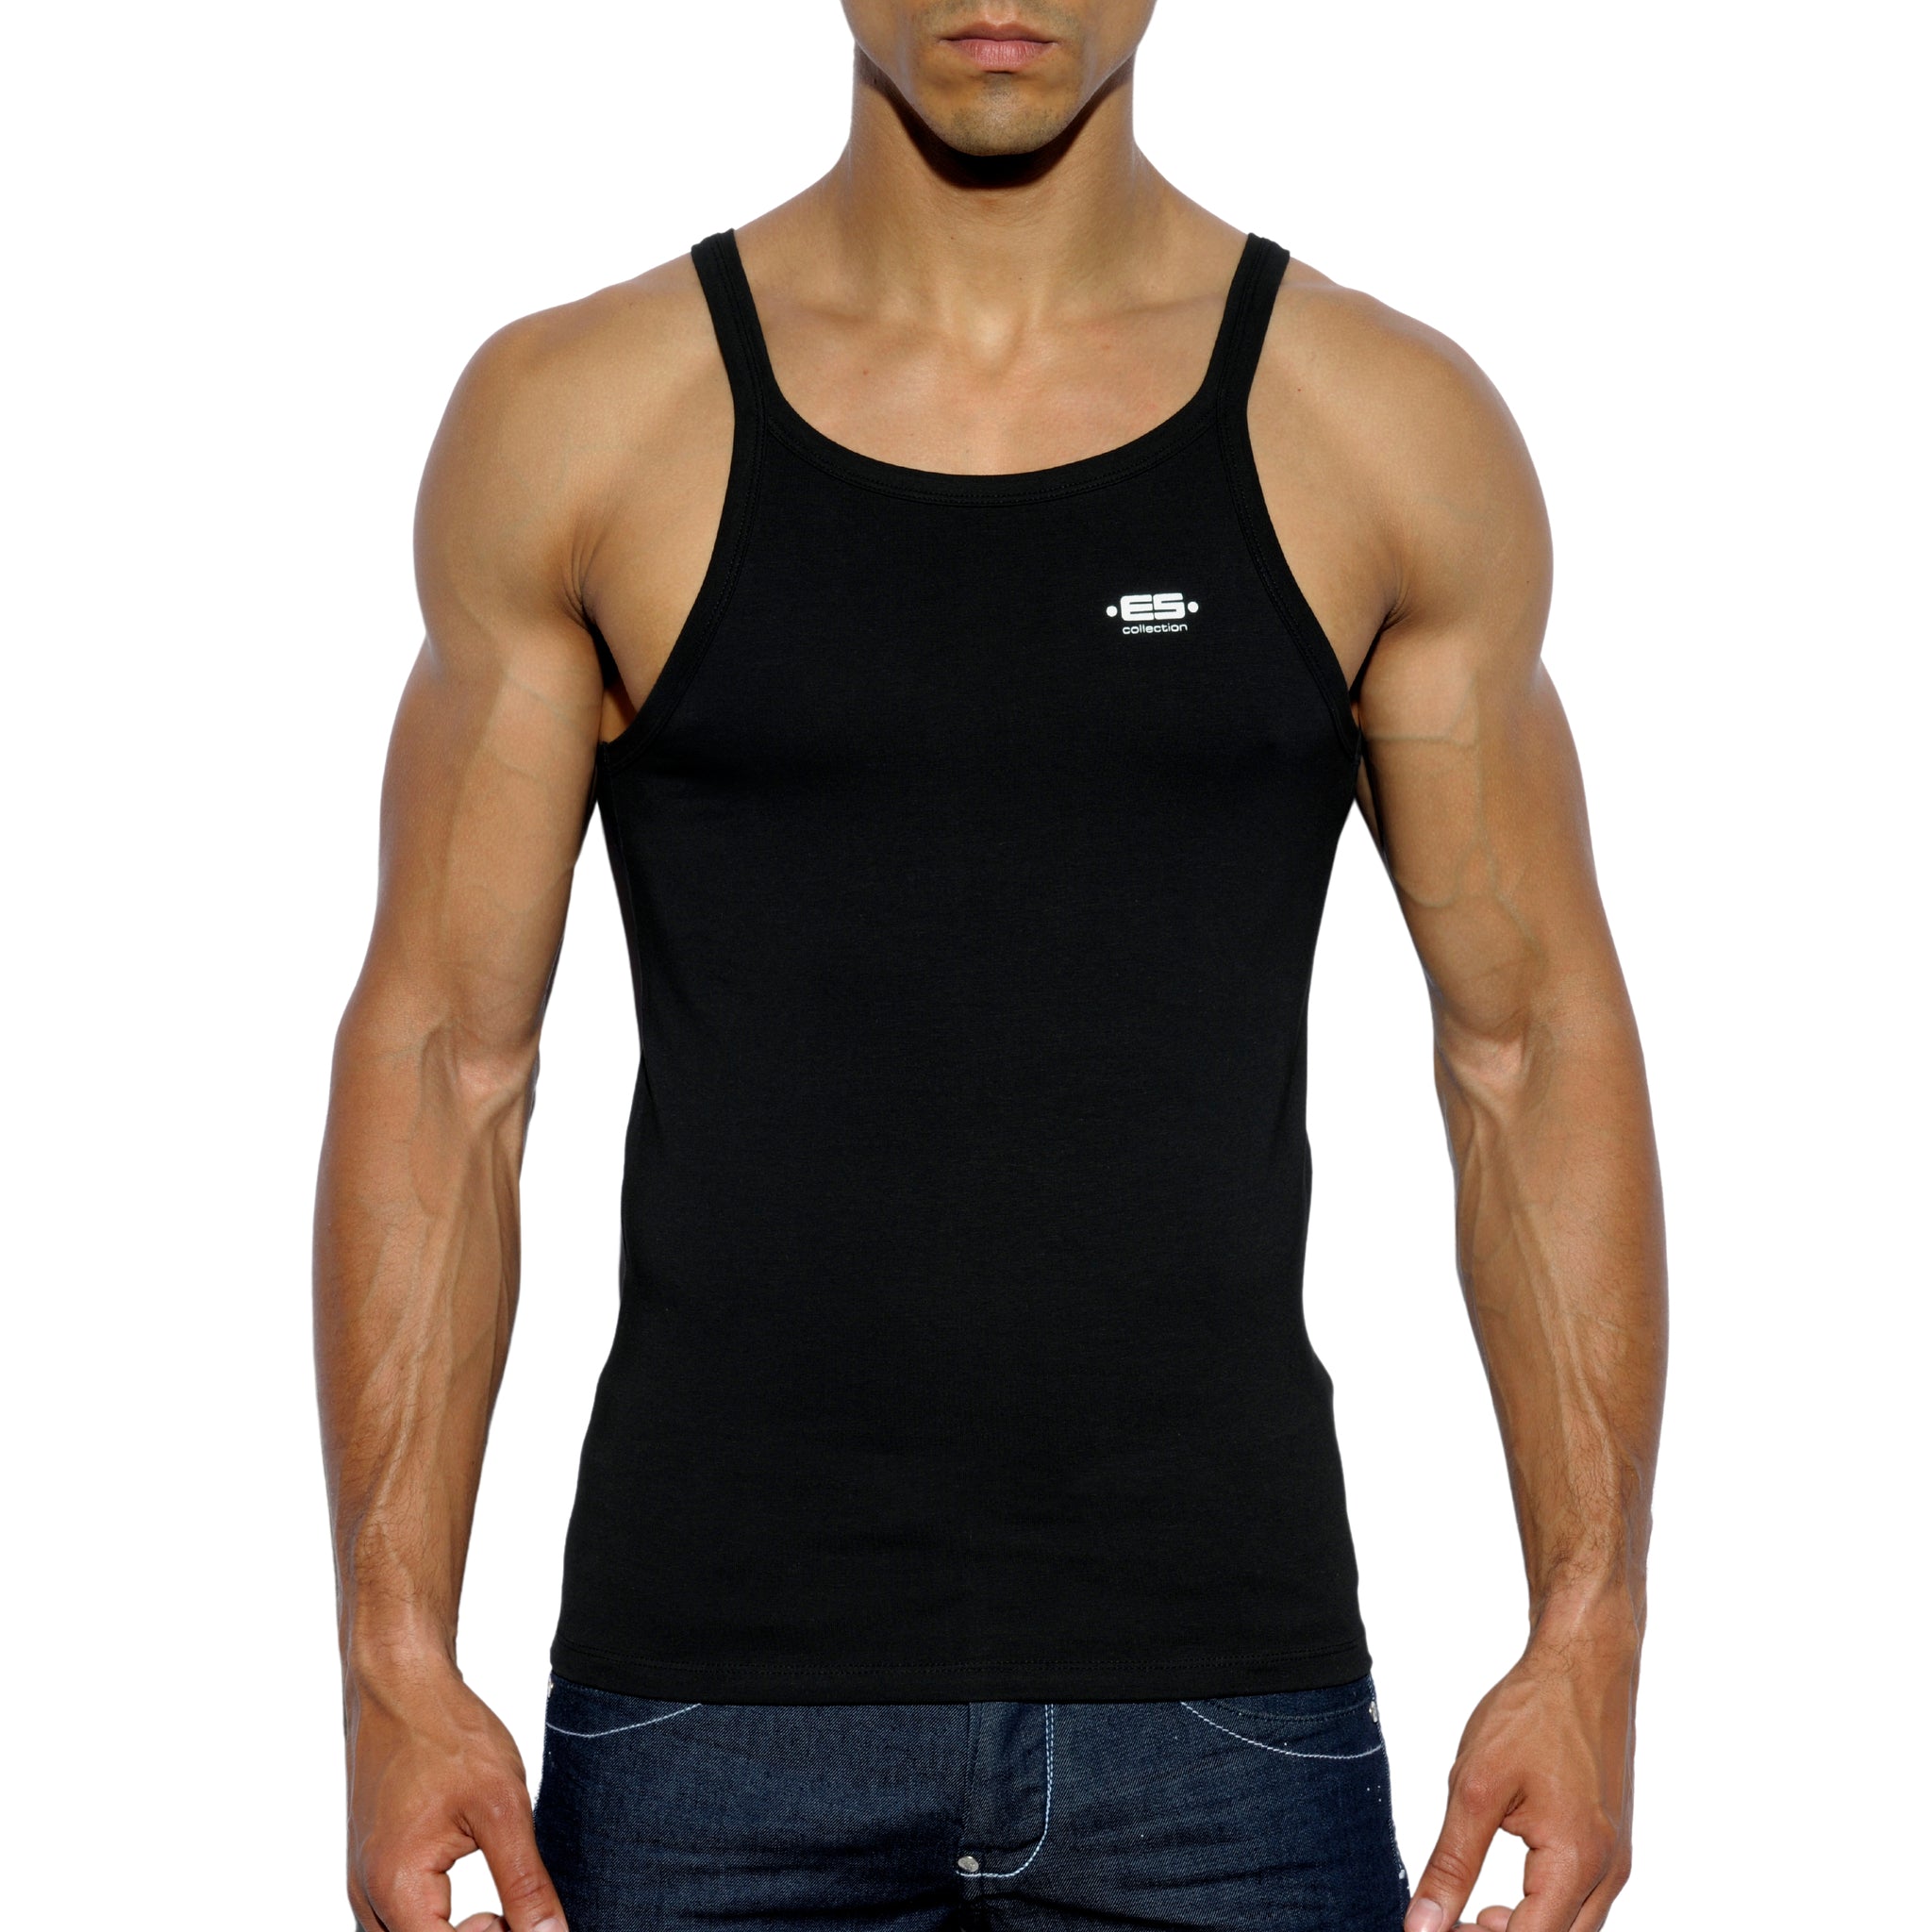 ES Collection Summer Tank Top Black TS187